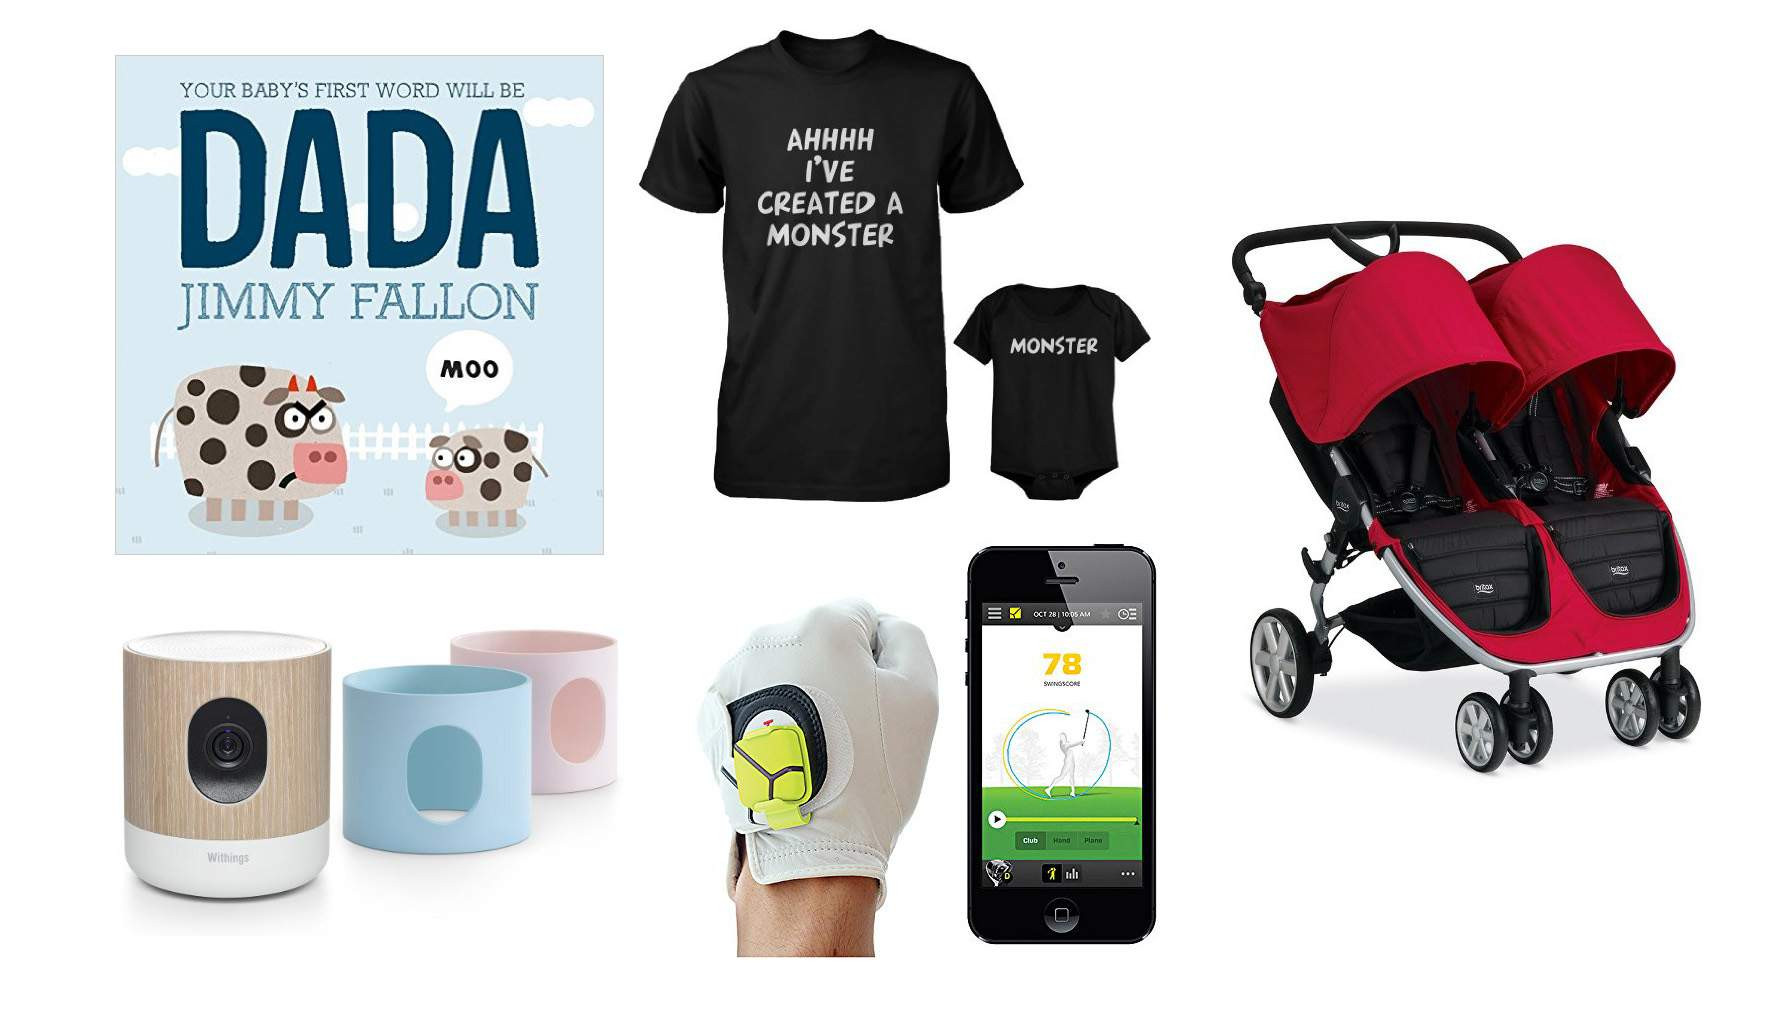 New Father Father'S Day Gift Ideas
 Top 10 Best Father’s Day Gifts for New Dads